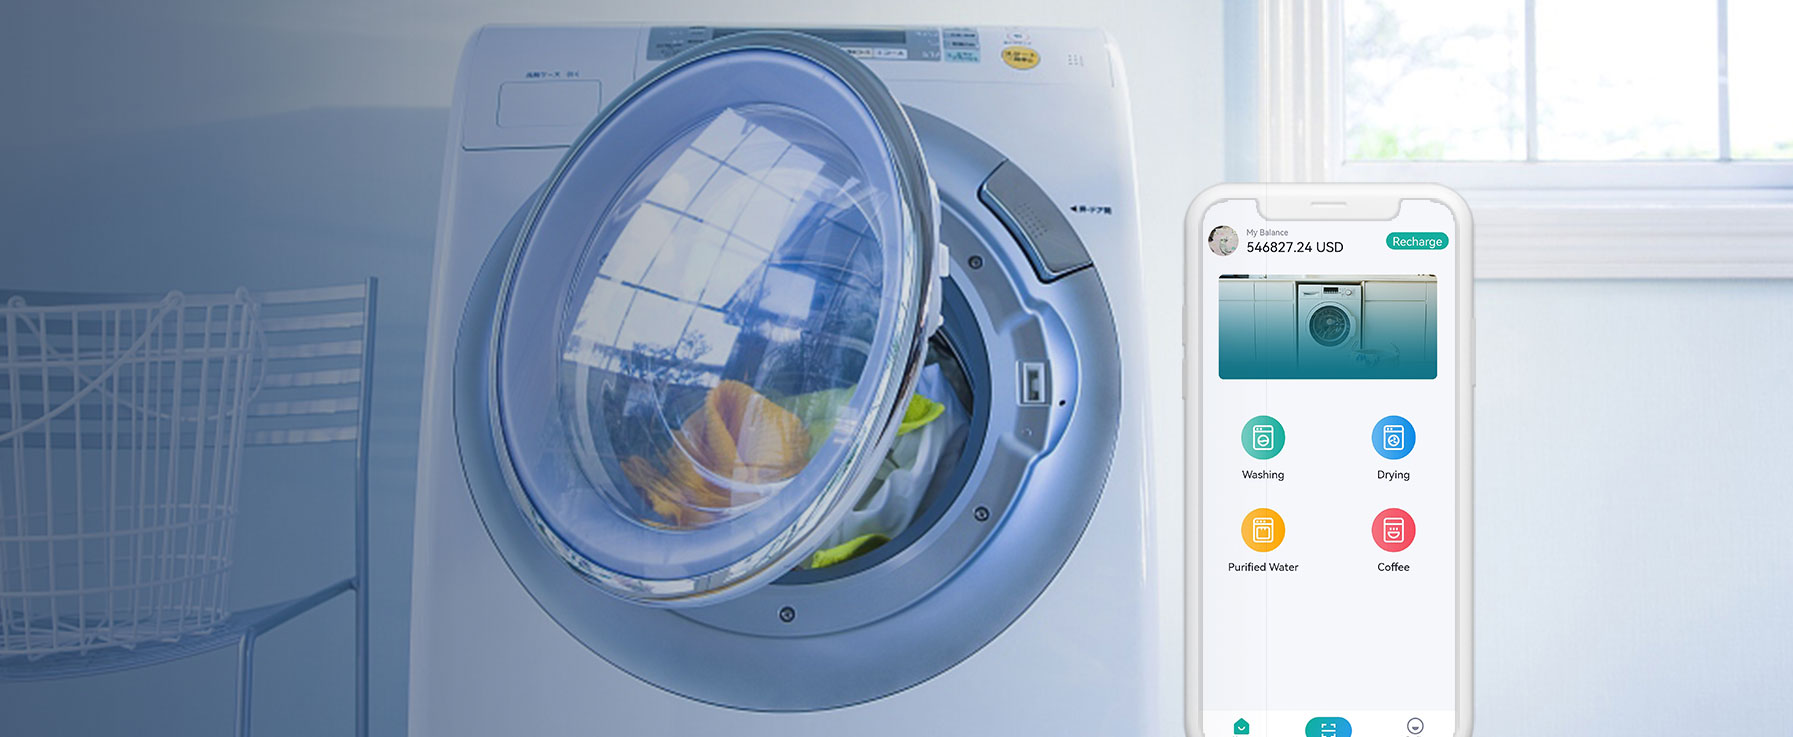 How does IoT payment solutions enhancing laundry business?